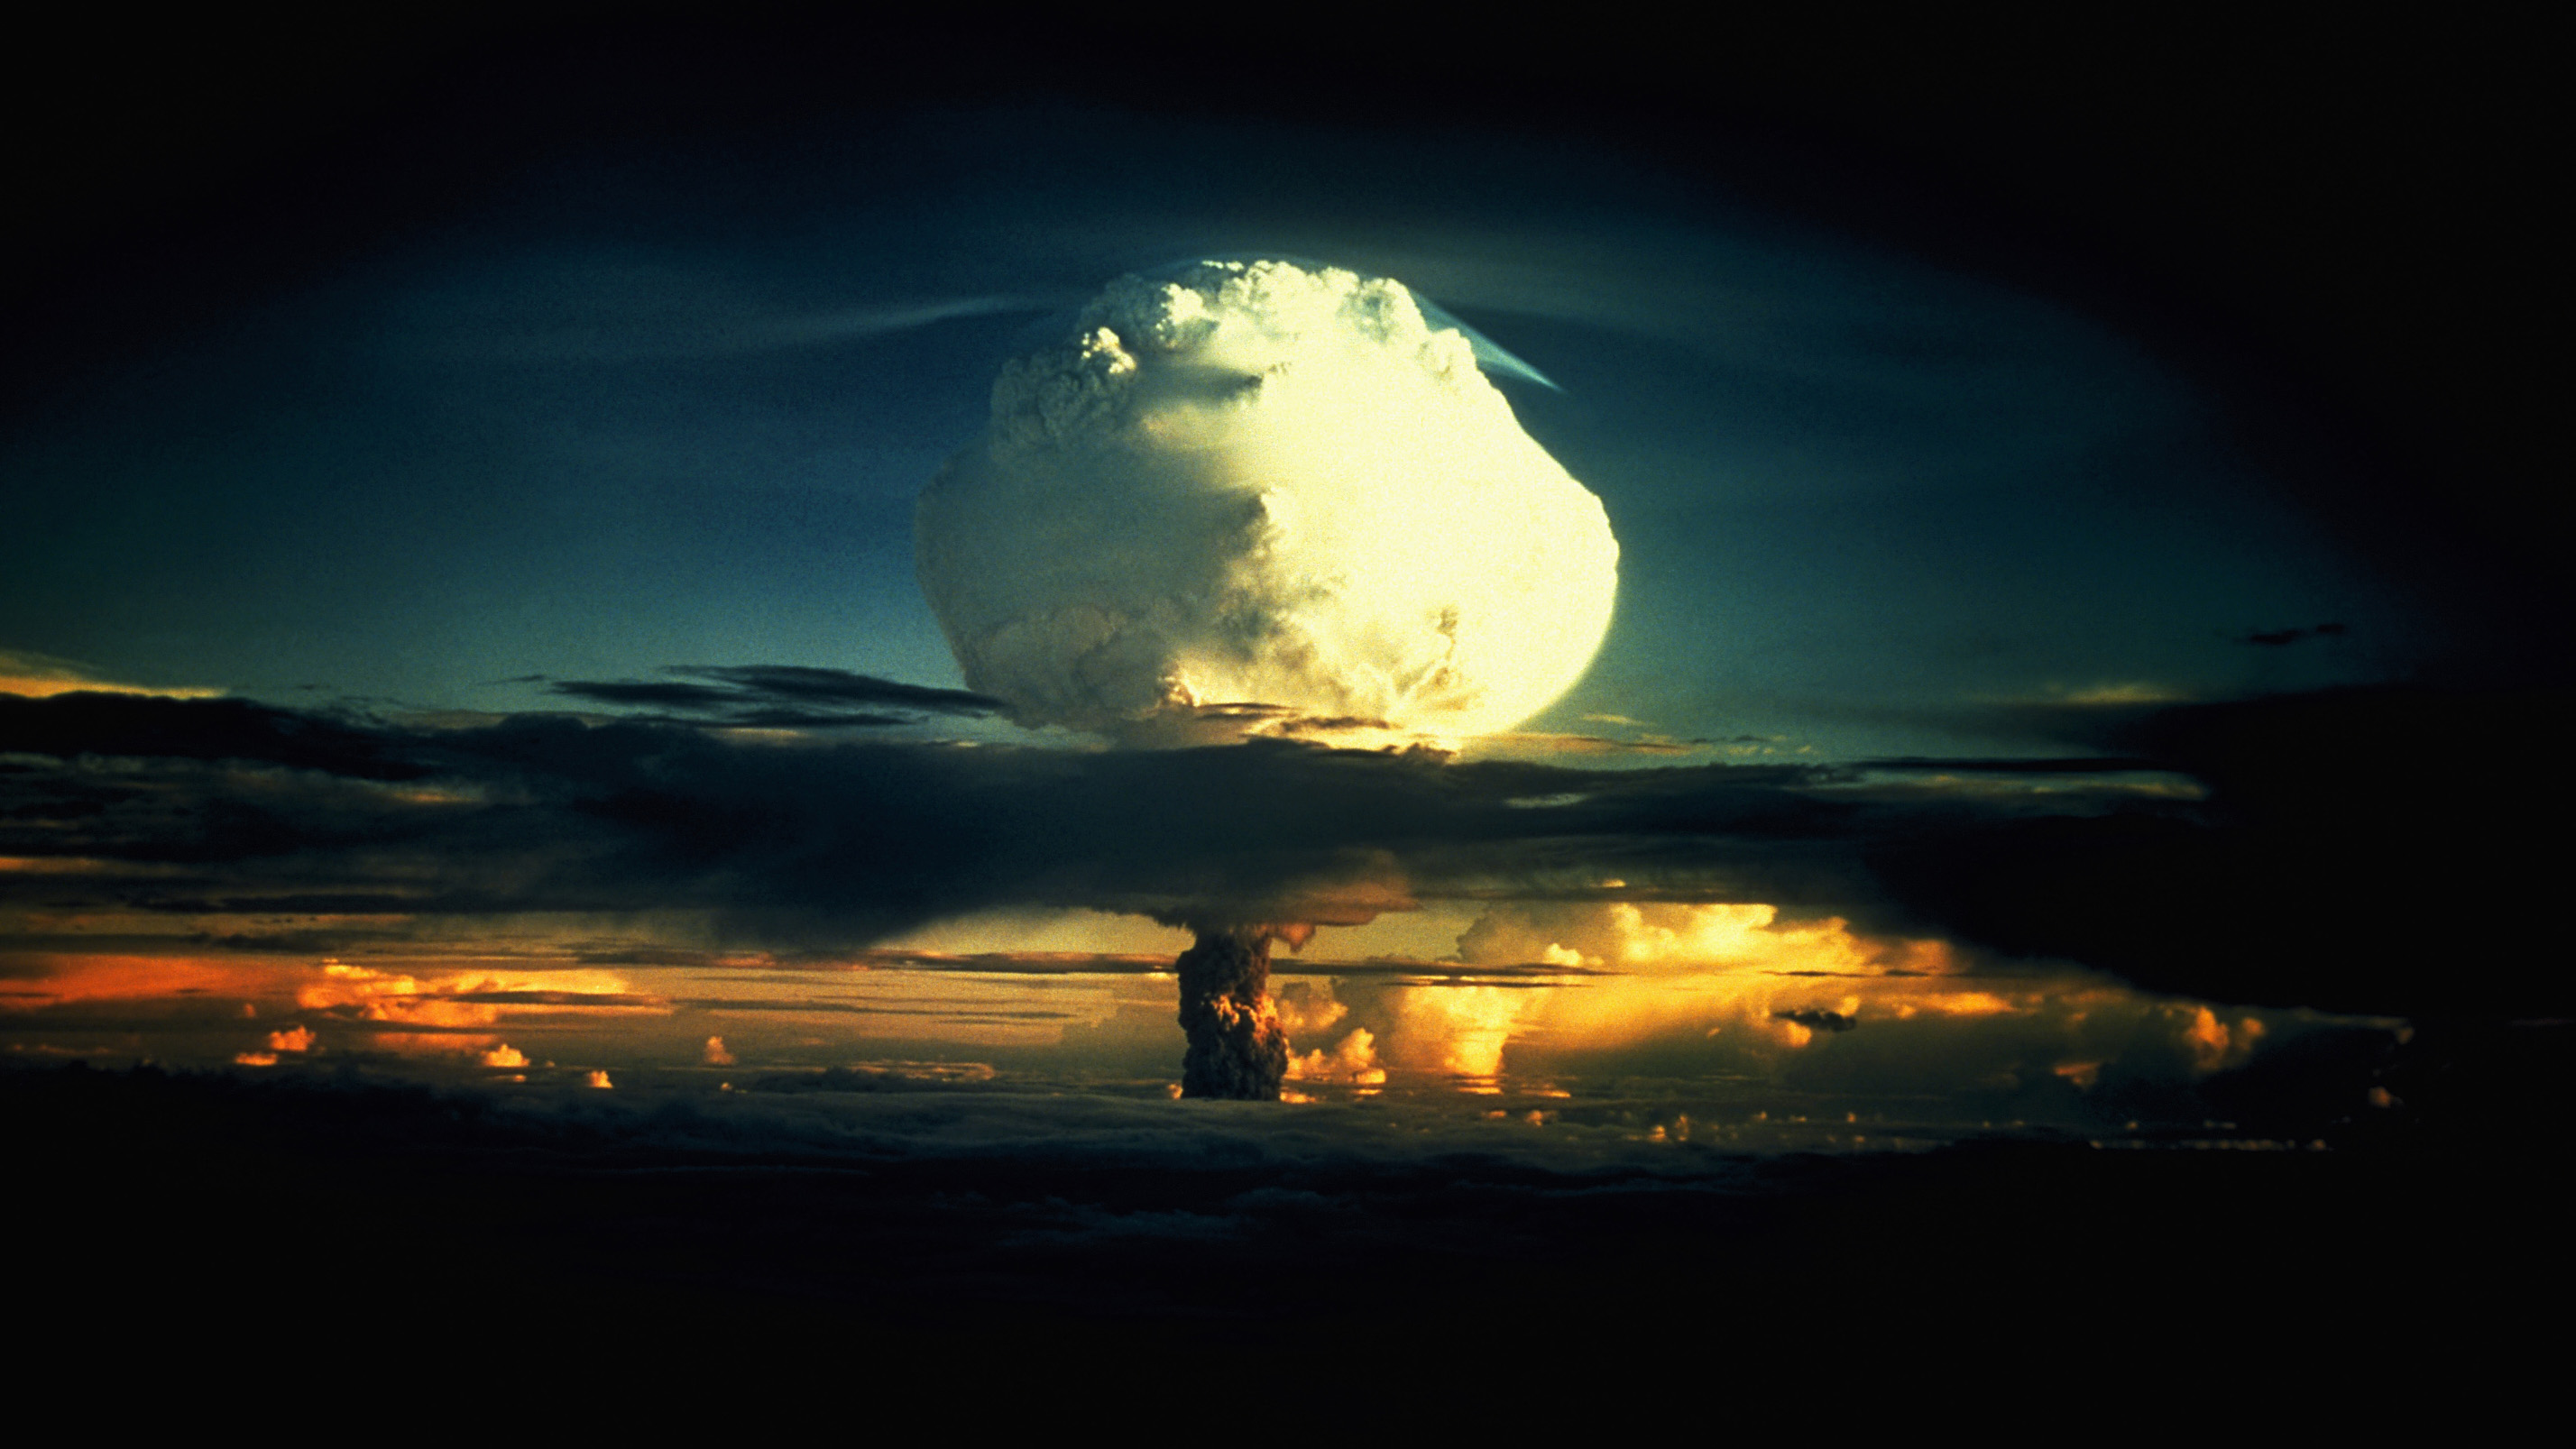 Why an EMP attack on the US would likely mark the start of WW3